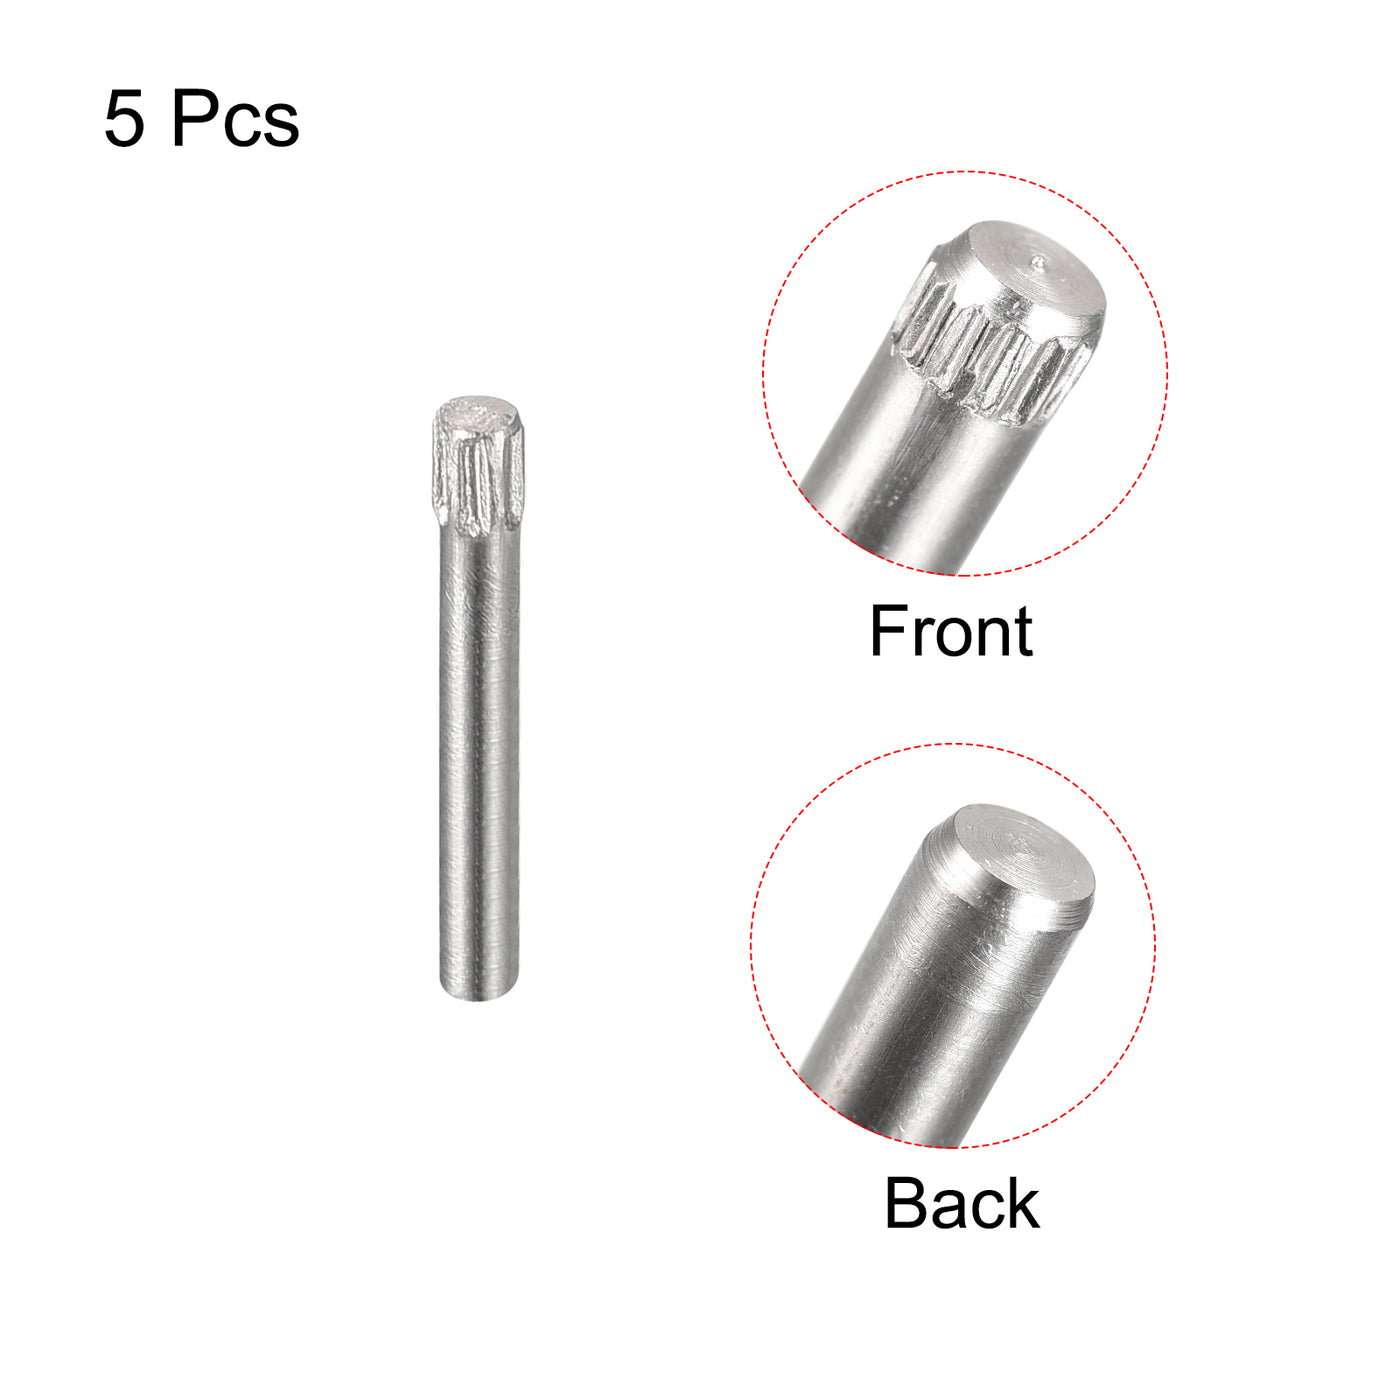 uxcell Uxcell 1.5x12mm 304 Stainless Steel Dowel Pins, 5Pcs Knurled Head Flat End Dowel Pin